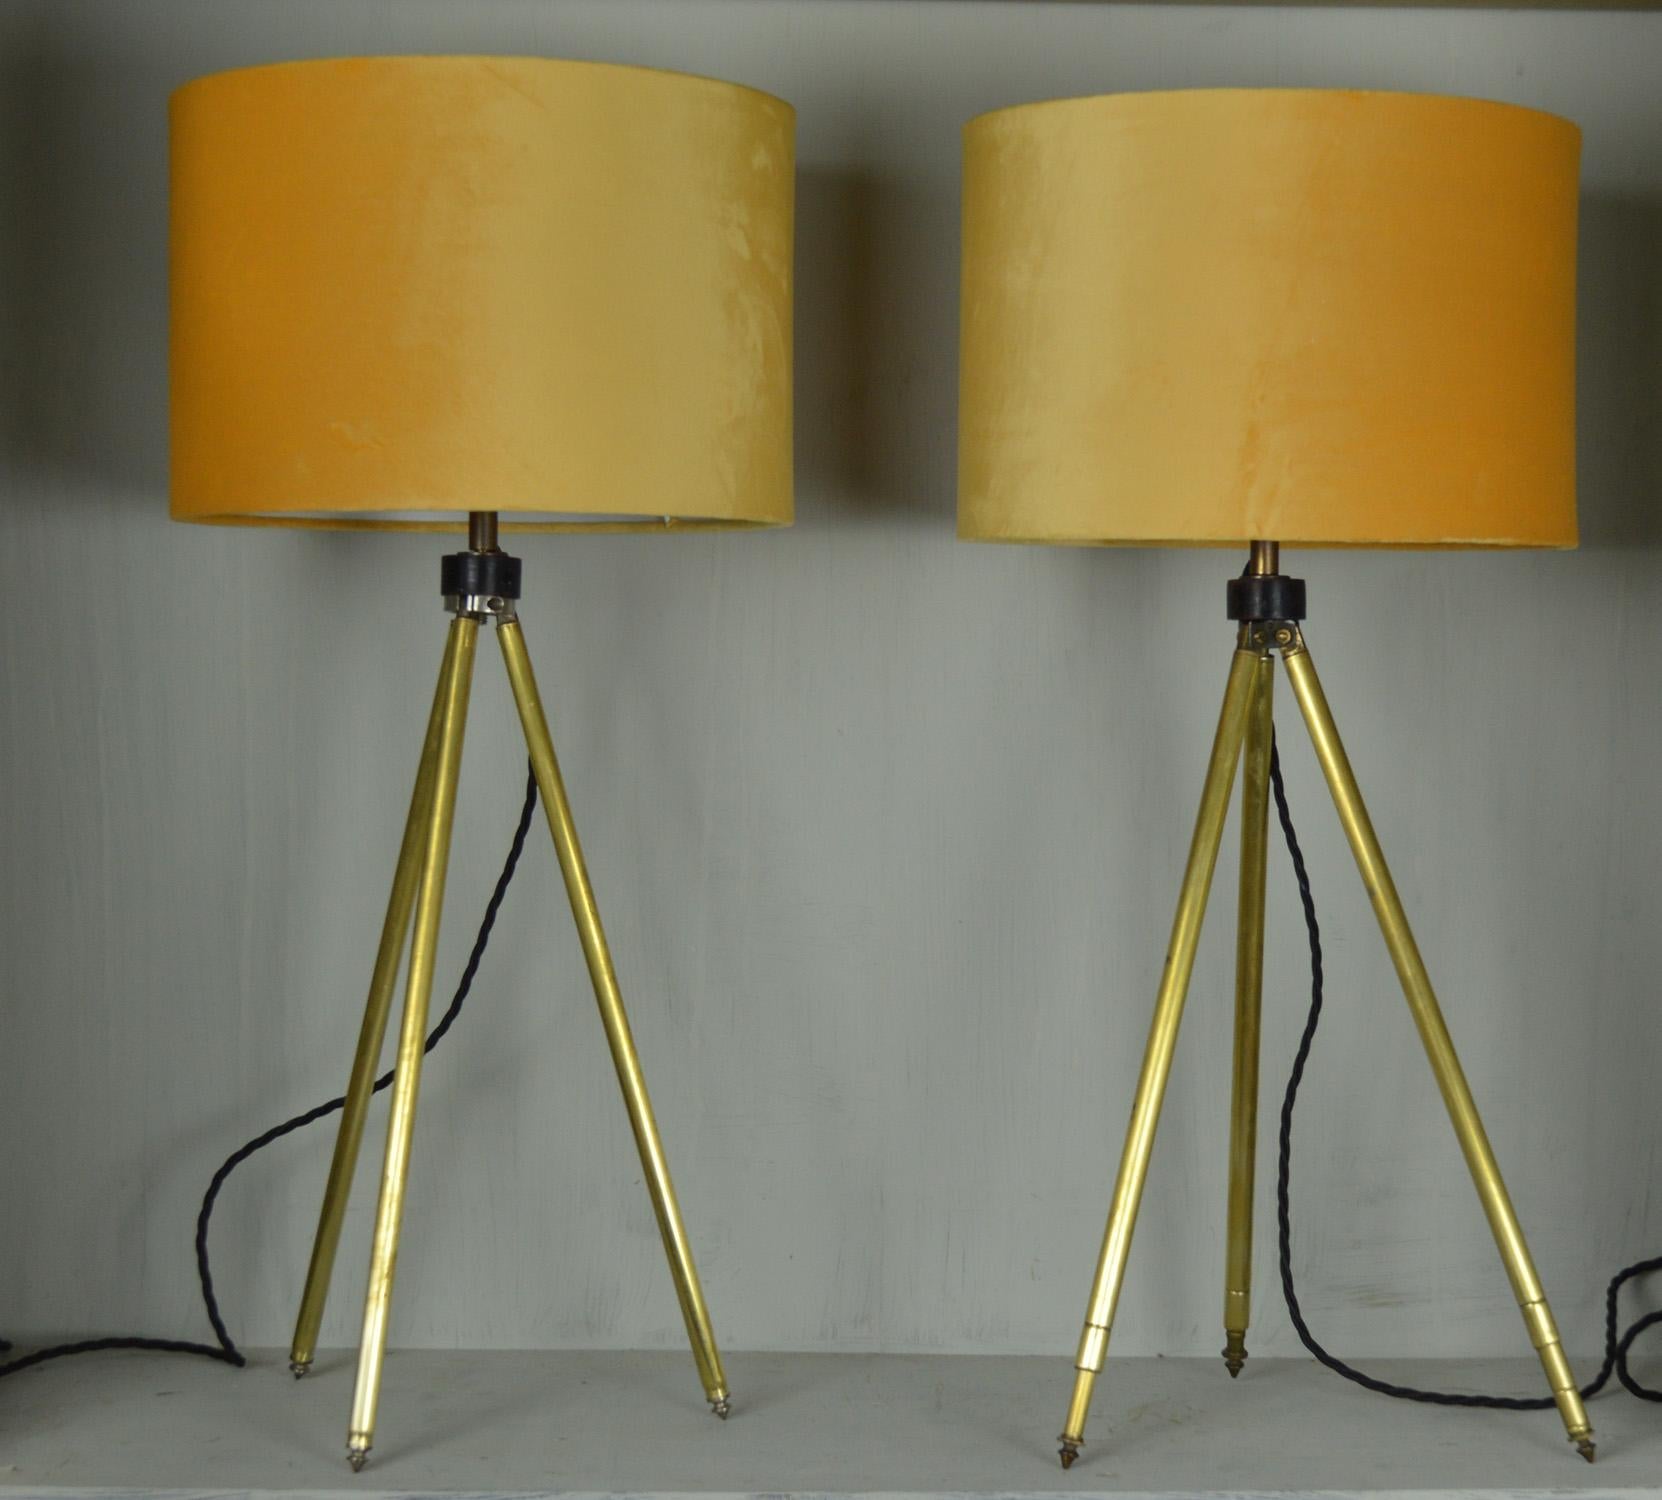 Super near pair of brushed brass tripod table lamps. Yellow velvet shades

Telescopic so the height can be adjusted. The measurement given below relates to the position in the image.

Converted from camera tripods.

Re-wired to UK